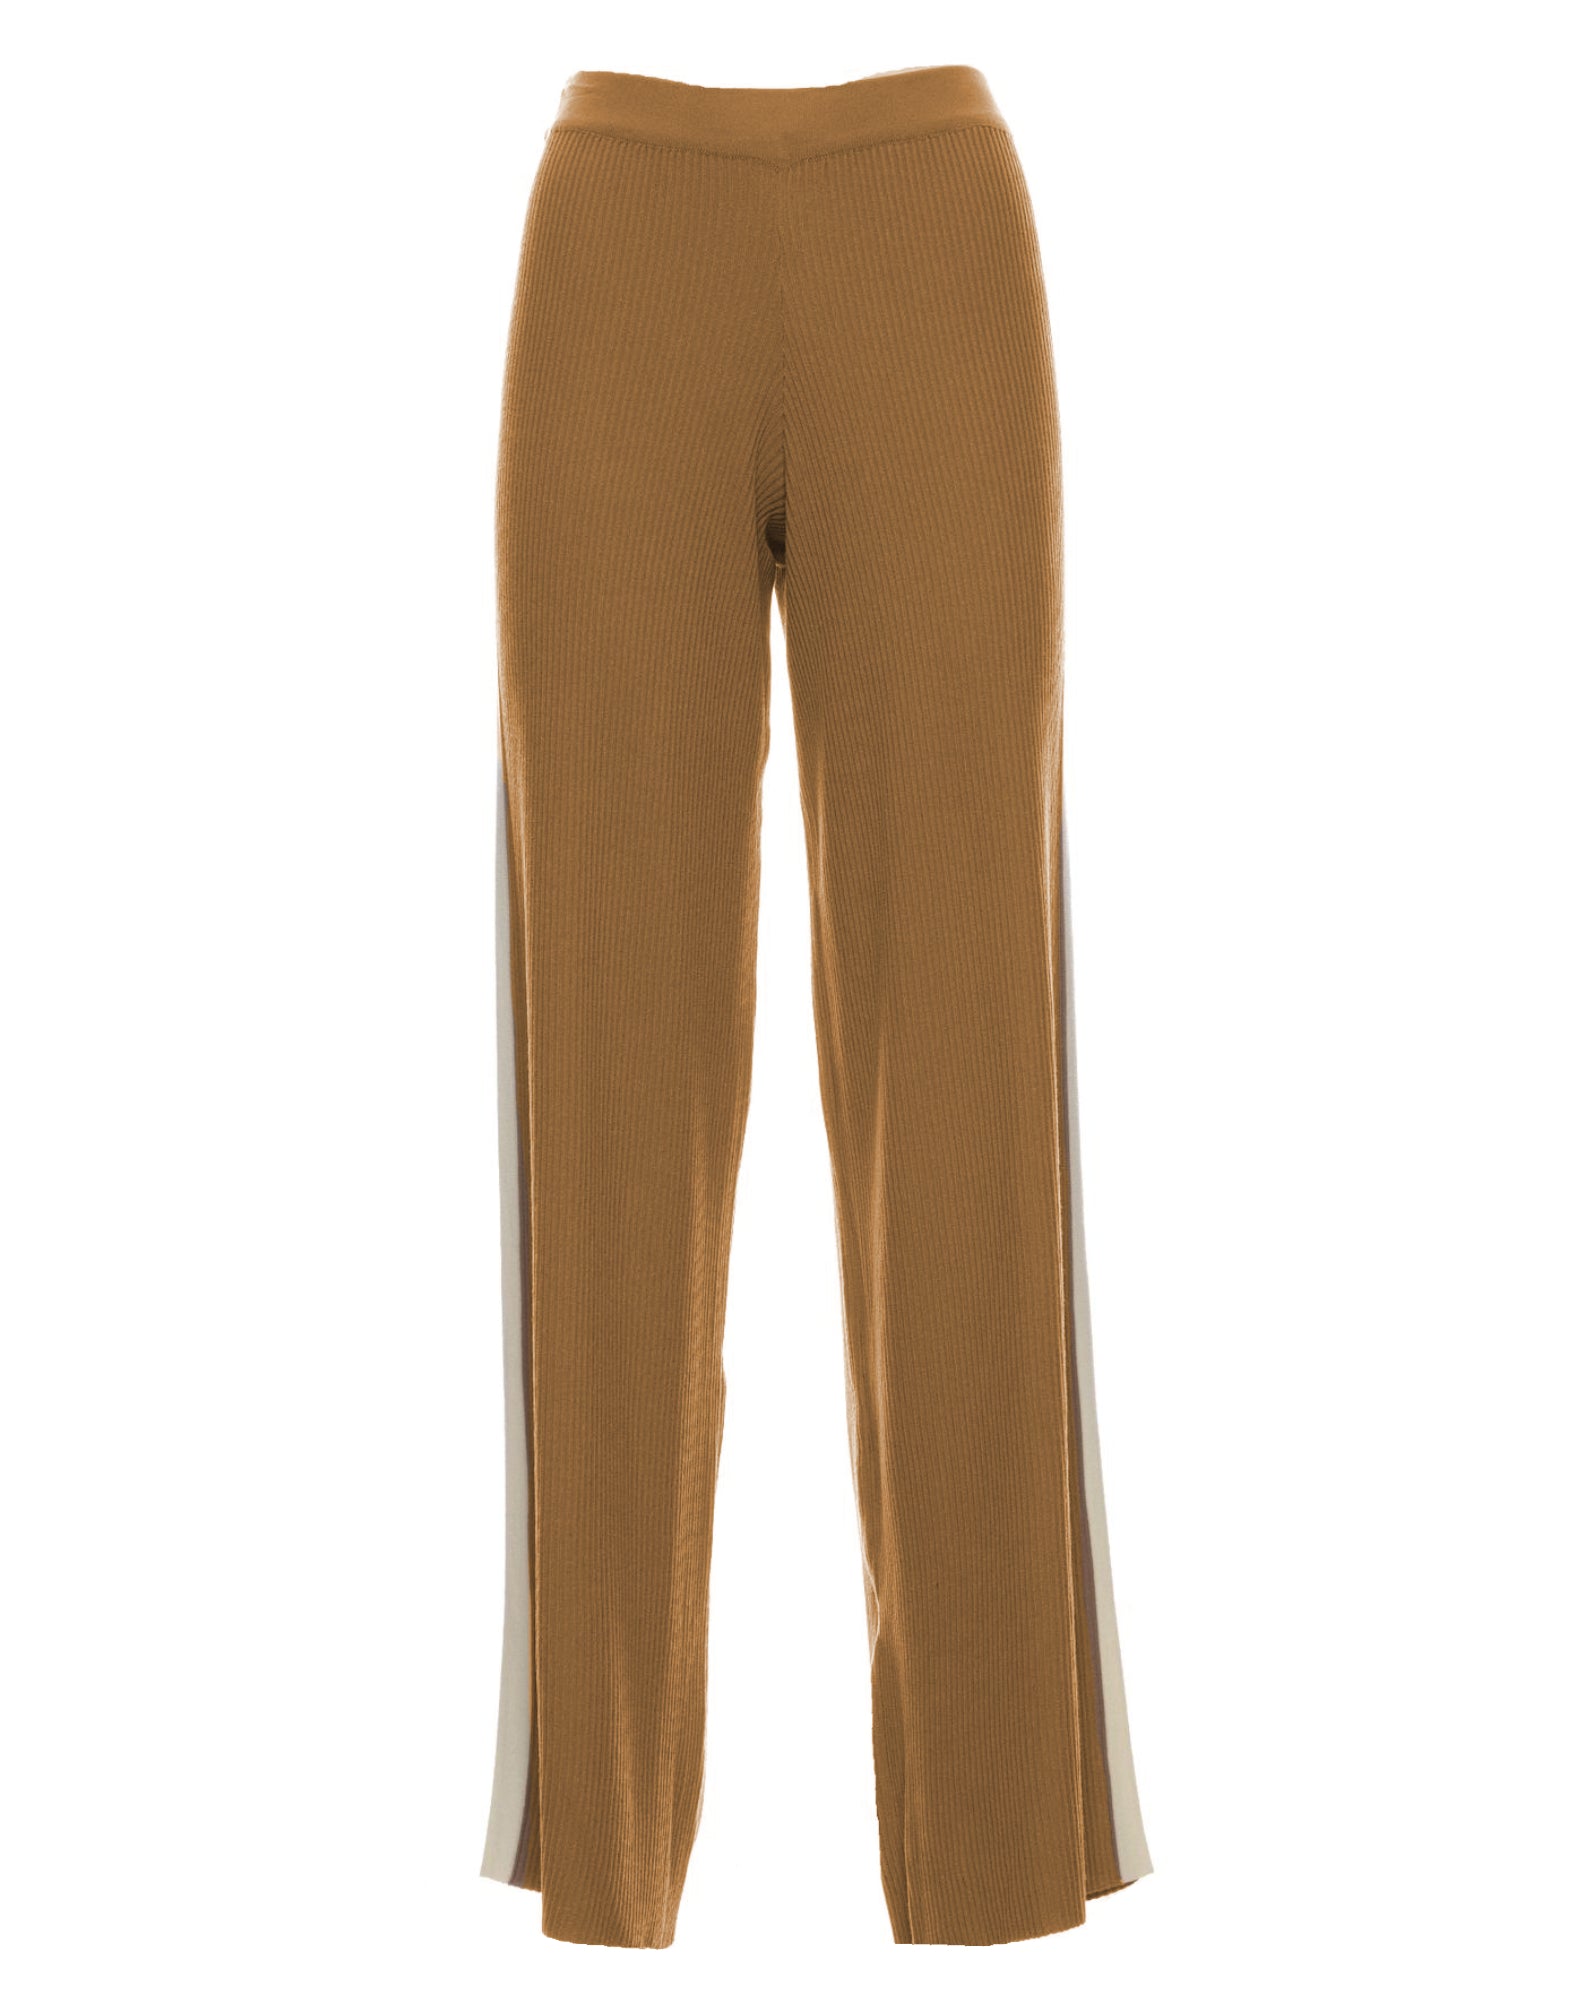 Pants for woman PTKD01018 BEIGE Akep